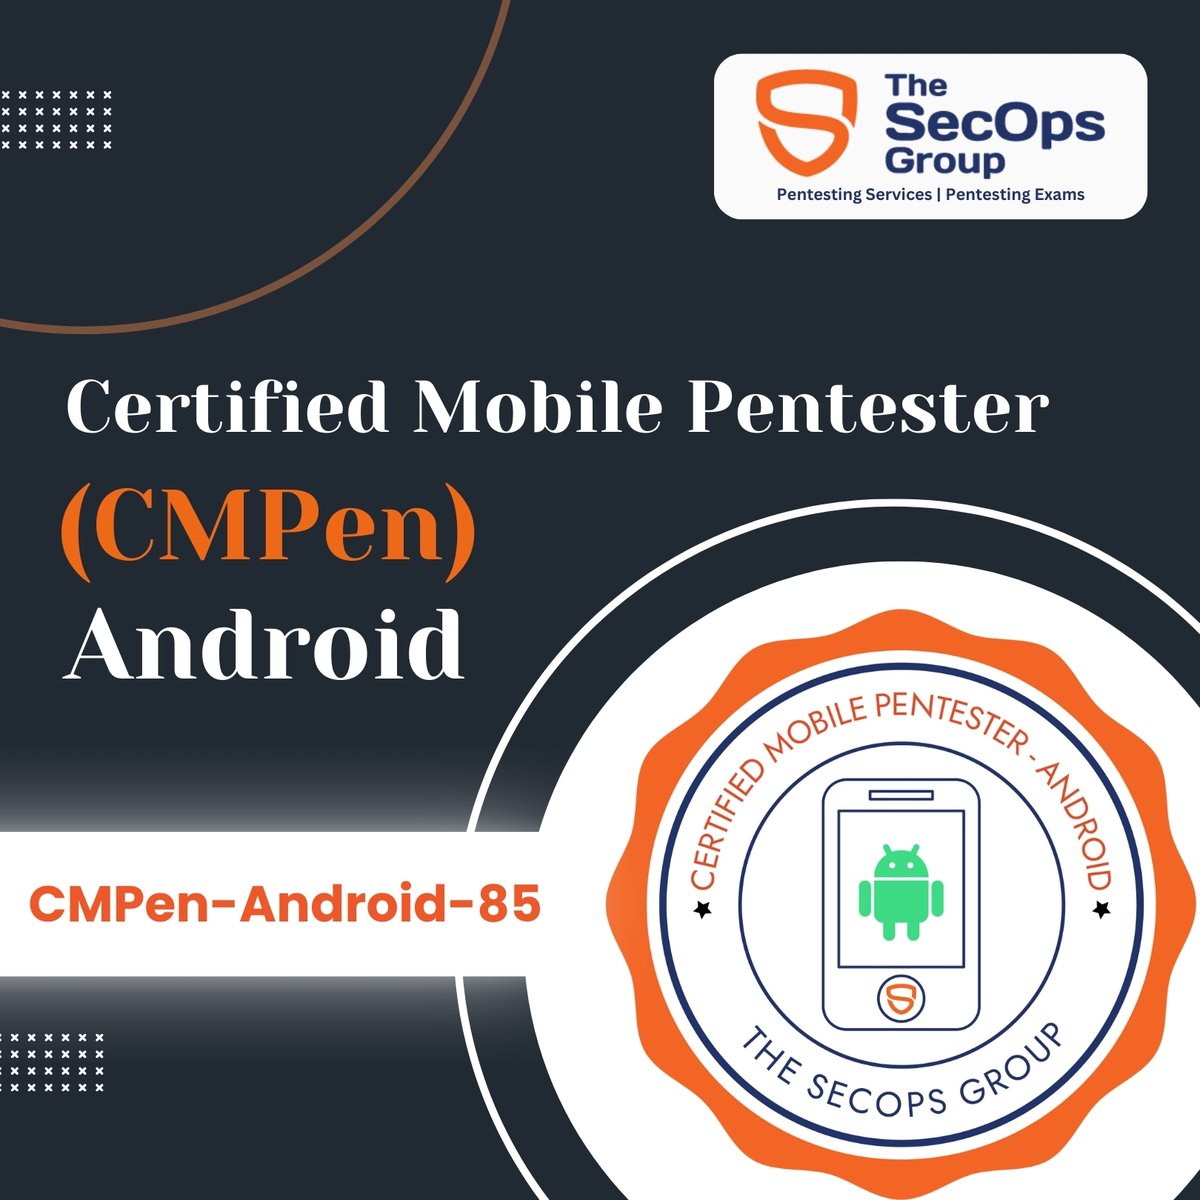 Be called an Android Mobile Application Security Expert. 🥷Take our CMPen-Android Pentesting Exam today!

*** 𝗟𝗶𝗸𝗲 𝗮𝗻𝗱 𝗥𝗲𝘀𝗵𝗮𝗿𝗲 𝗳𝗼𝗿 𝗮 𝗖𝗵𝗮𝗻𝗰𝗲 𝘁𝗼 𝗪𝗶𝗻 𝗕𝗶𝗴! ***
𝟑 𝐥𝐮𝐜𝐤𝐲 𝐰𝐢𝐧𝐧𝐞𝐫𝐬 will receive the CMPen-Android exam for FREE!

Get an 85%